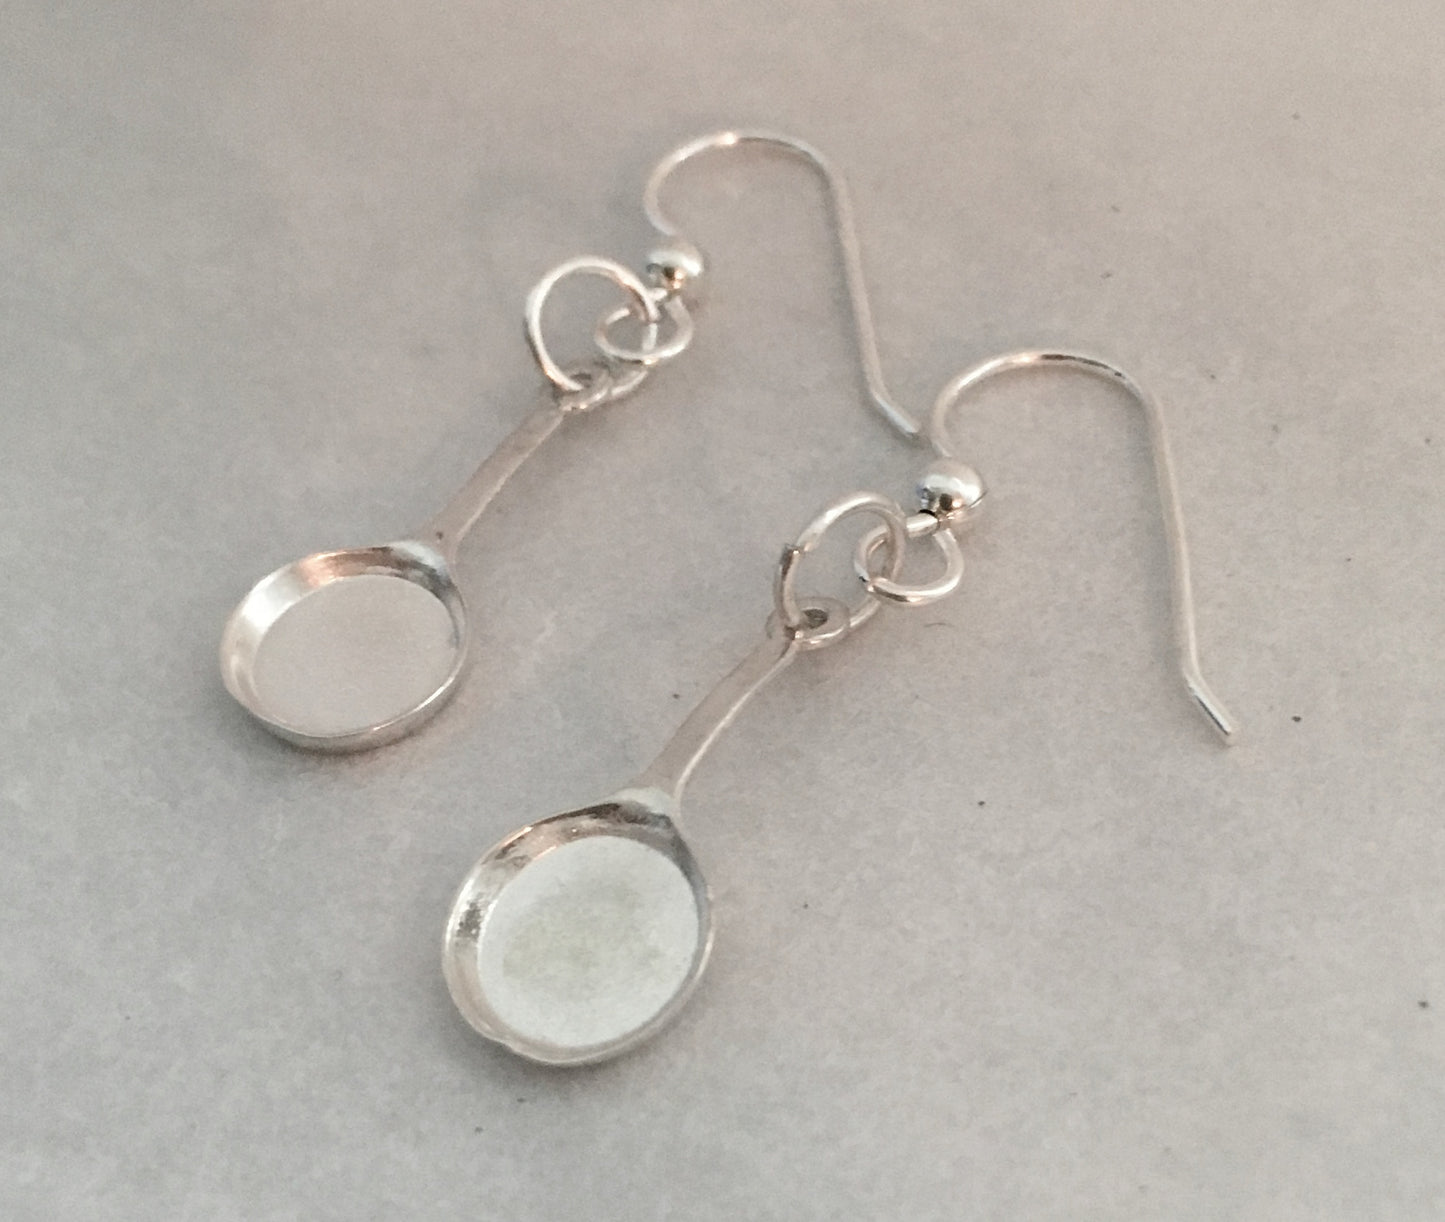 sterling silver frying pan earrings with french hooks